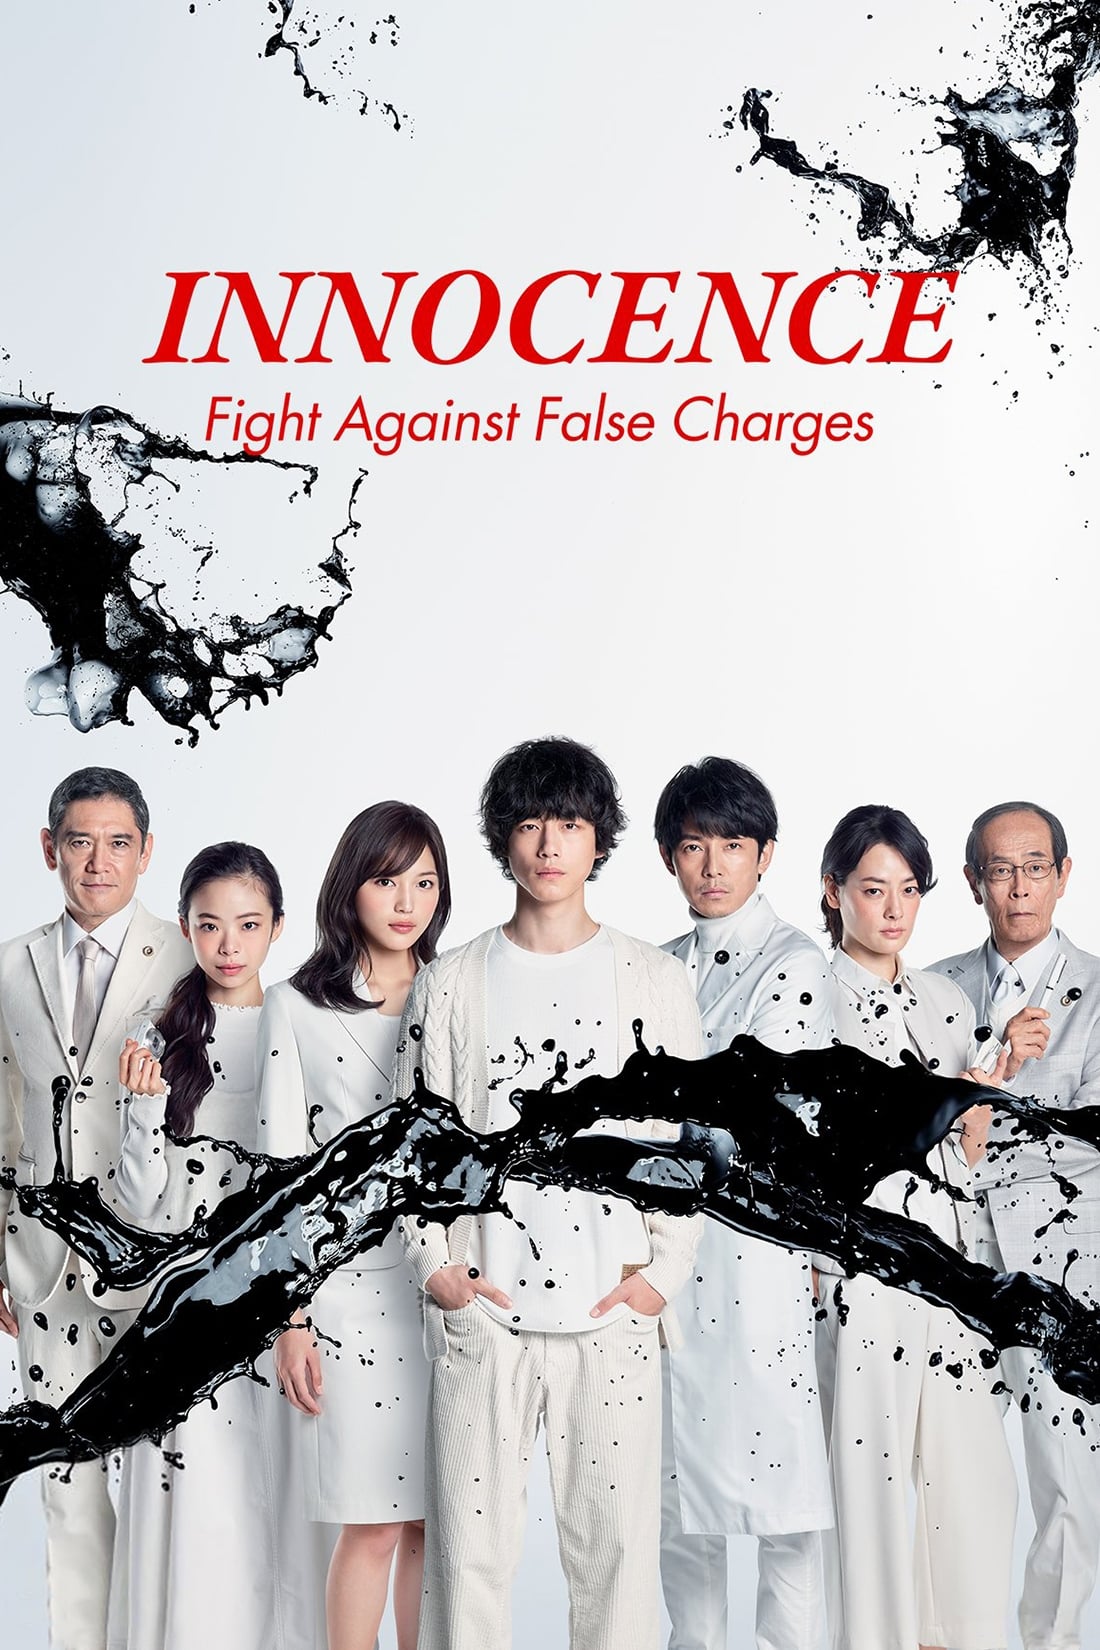 Innocence, Fight Against False Charges (2019)